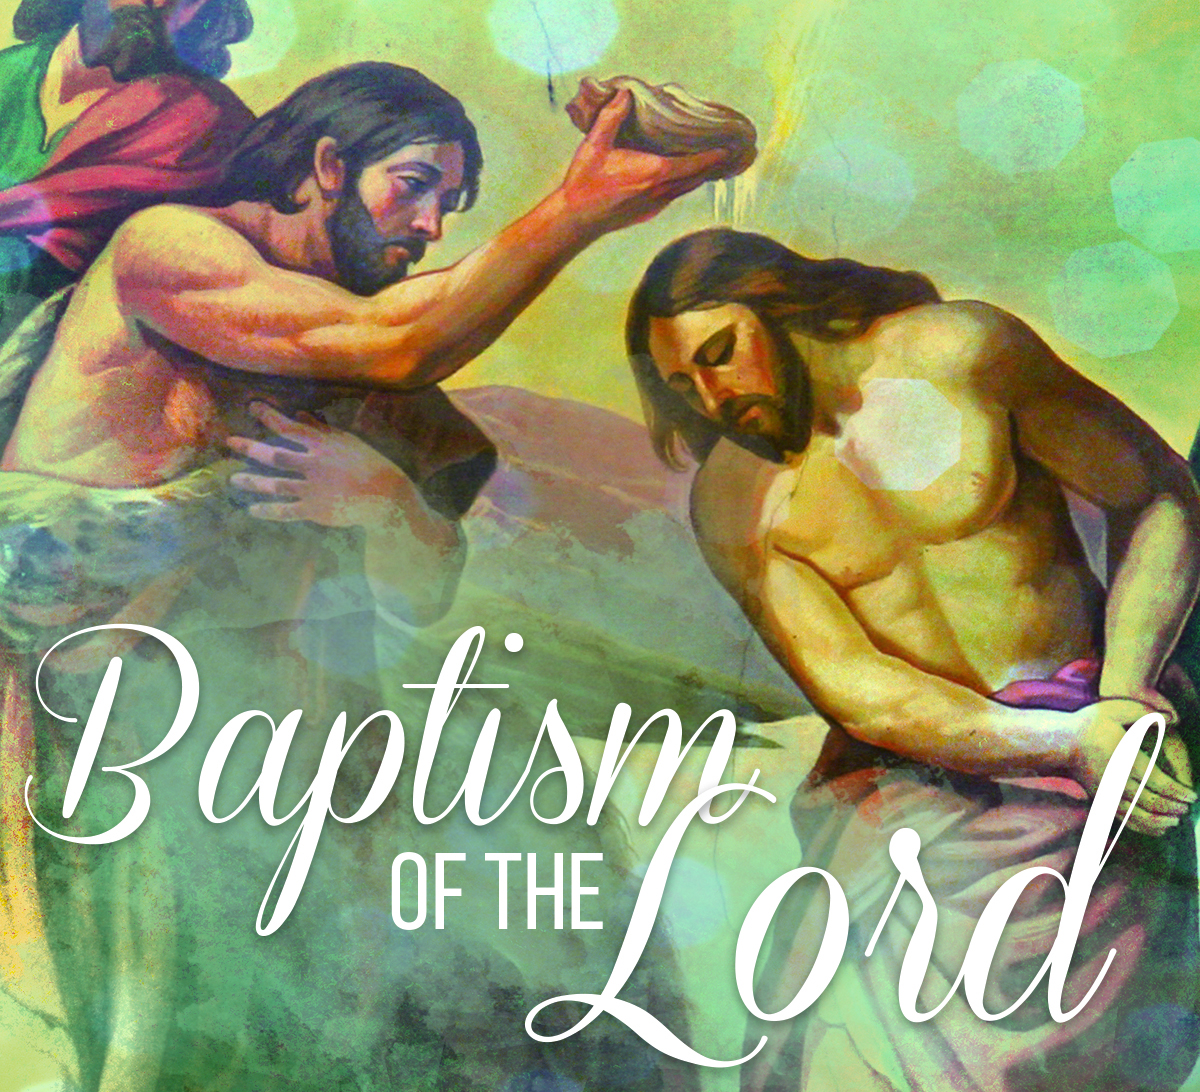 reflection essay about baptism